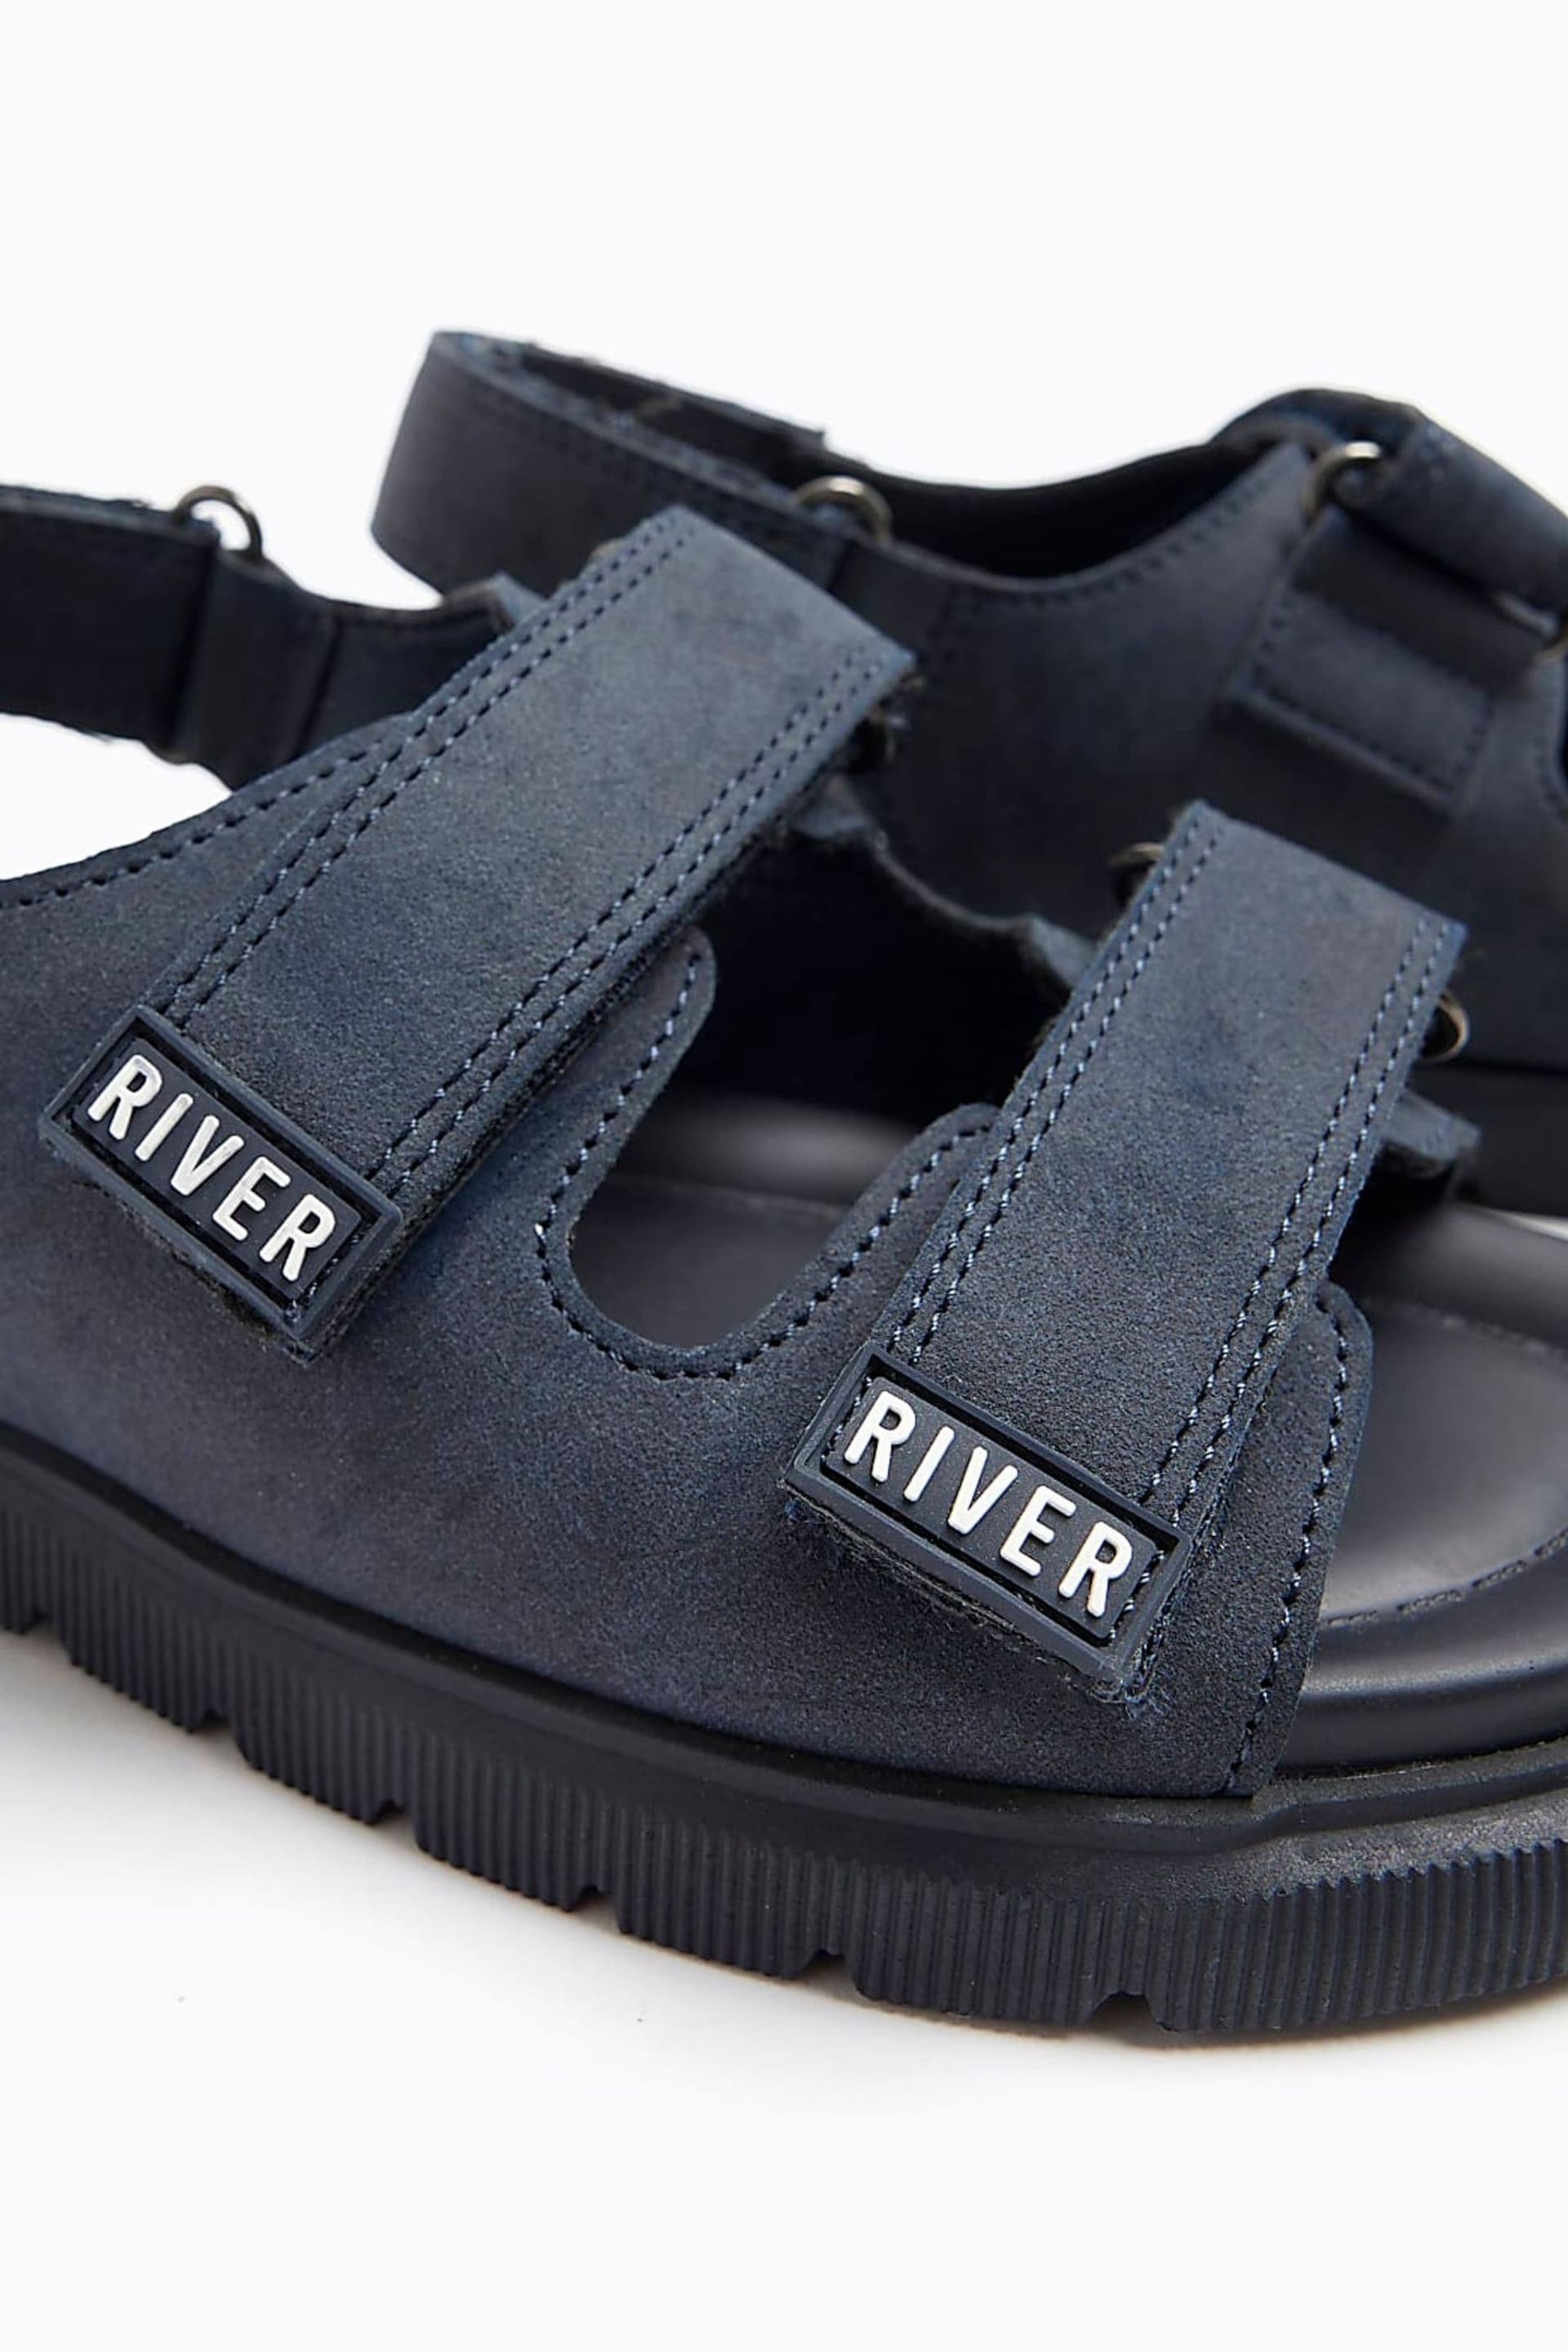 River Island Blue Boys Double Strap Sandals - Image 5 of 5